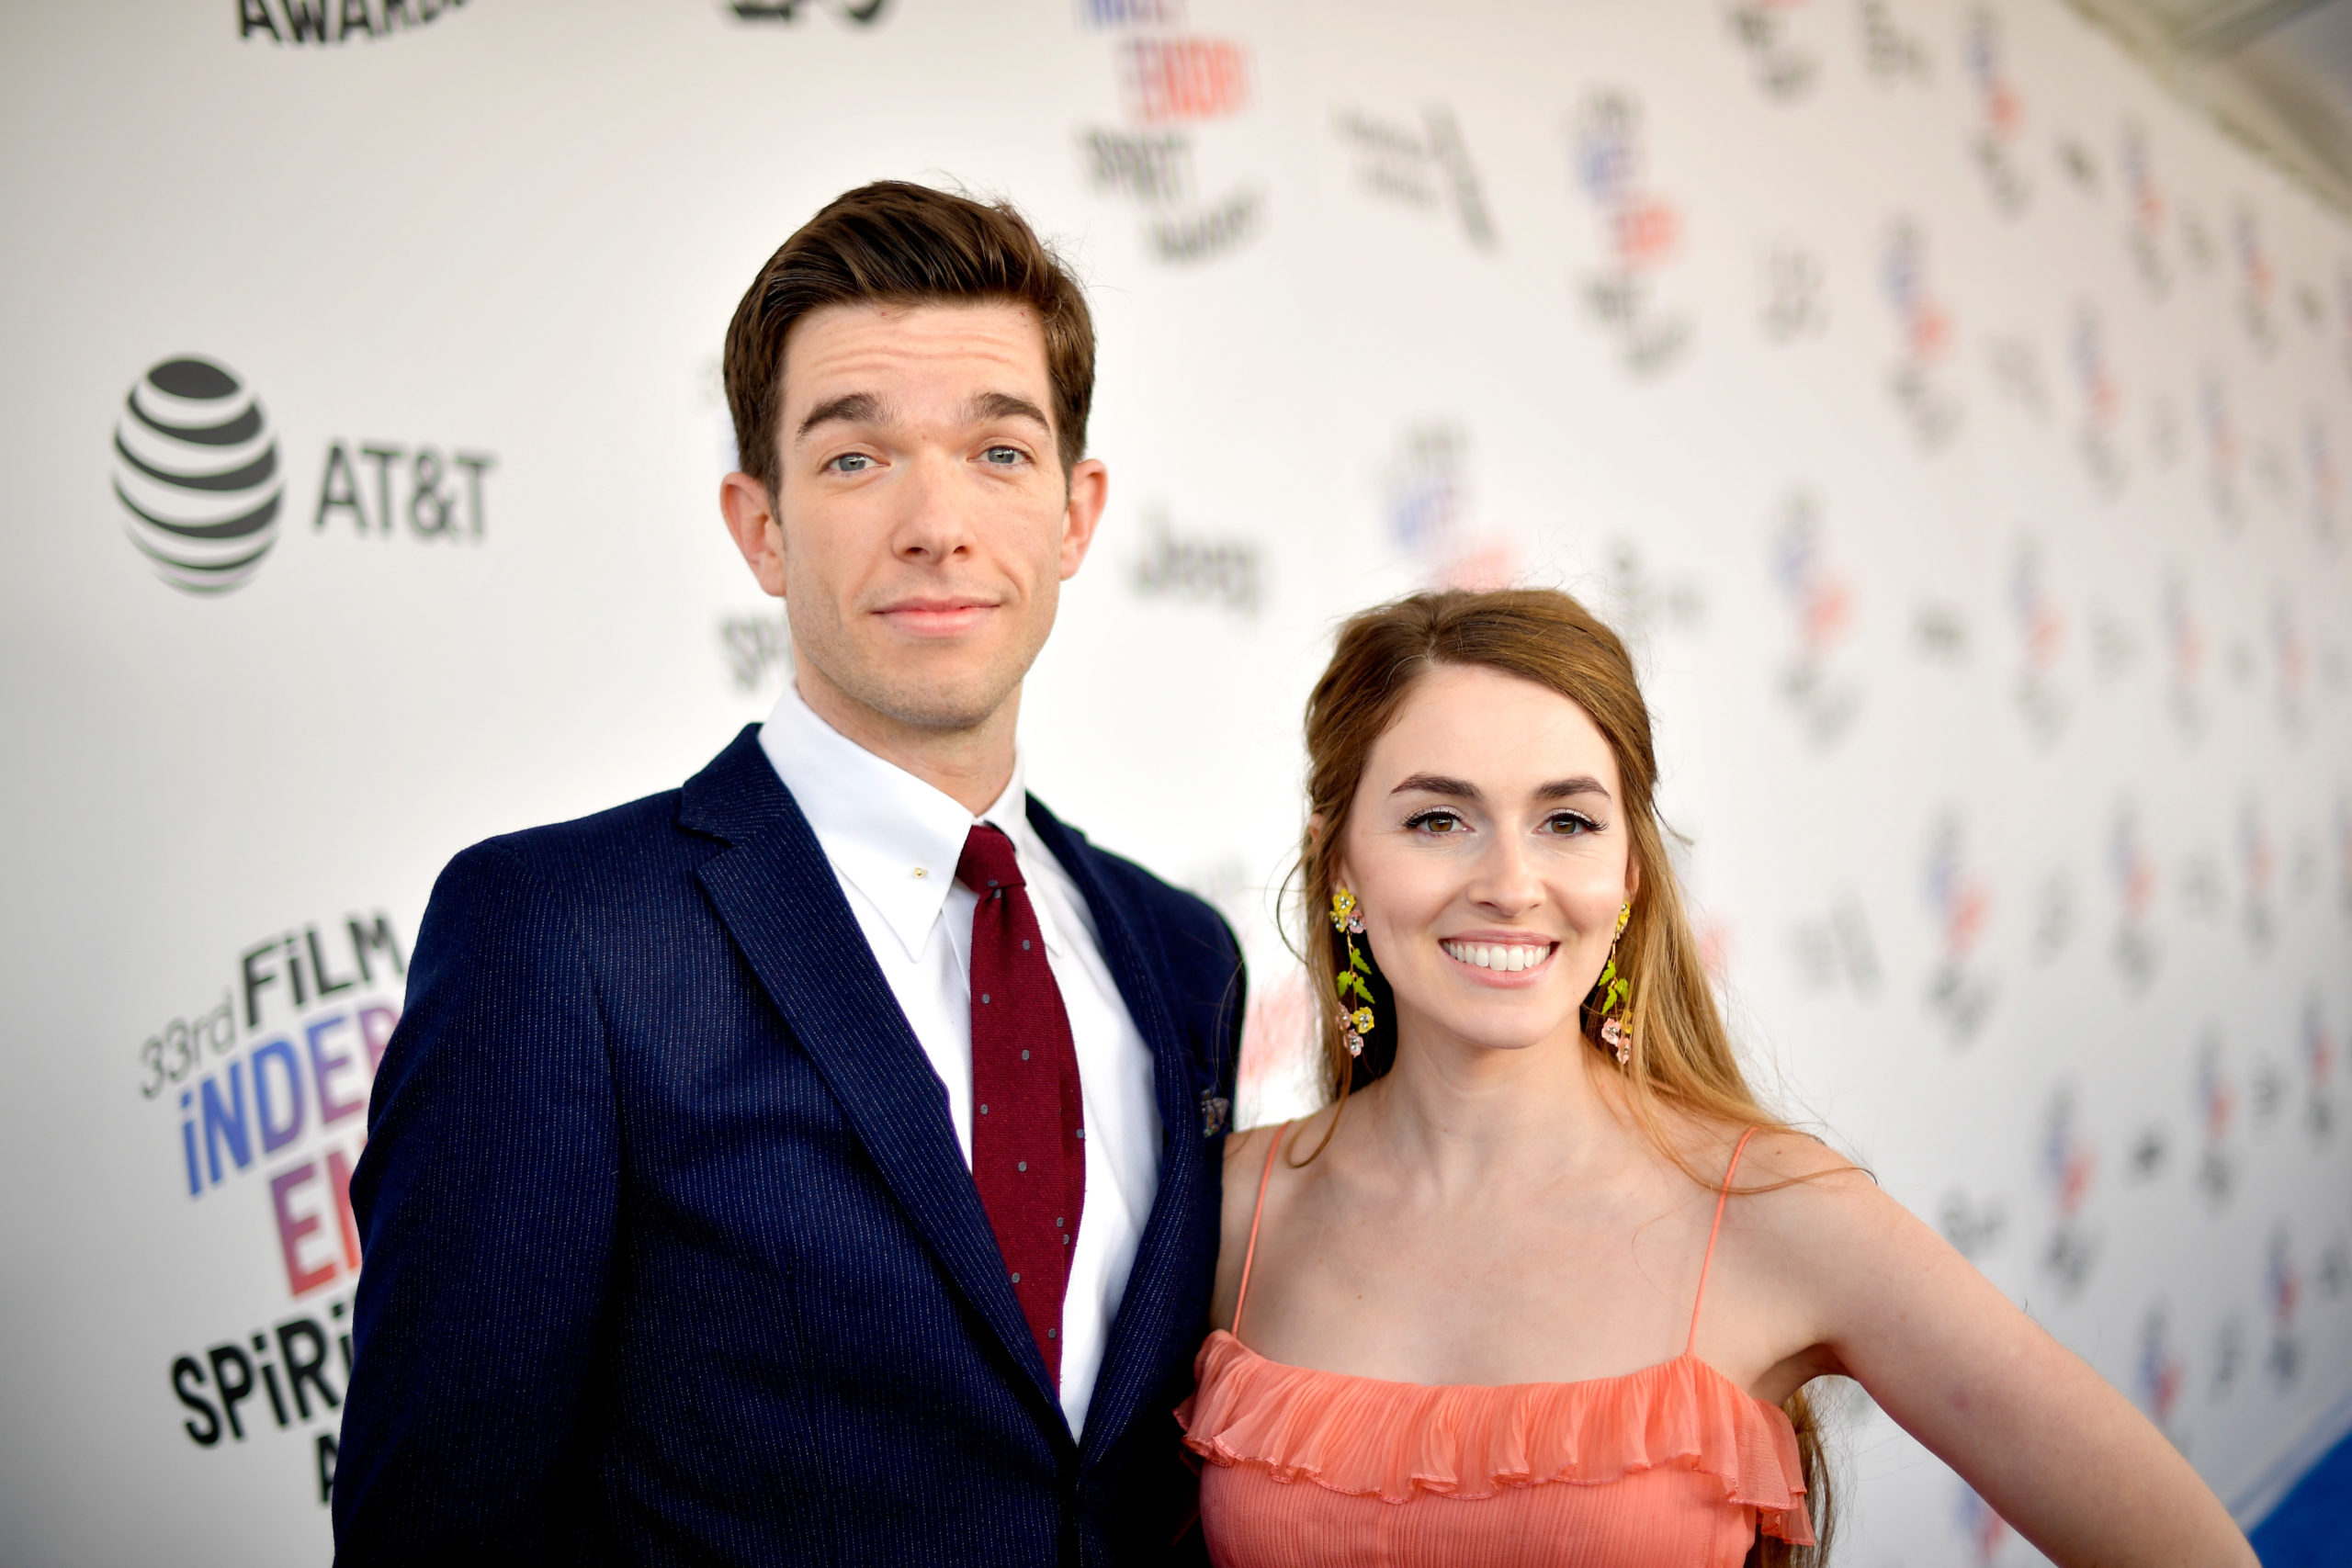 SANTA MONICA, CA - MARCH 03: Comedian John Mulaney and wife Annamarie Tendler attends the 2018 Film Independent Spirit Awards on March 3, 2018 in Santa Monica, California. (Photo by Matt Winkelmeyer/Getty Images)